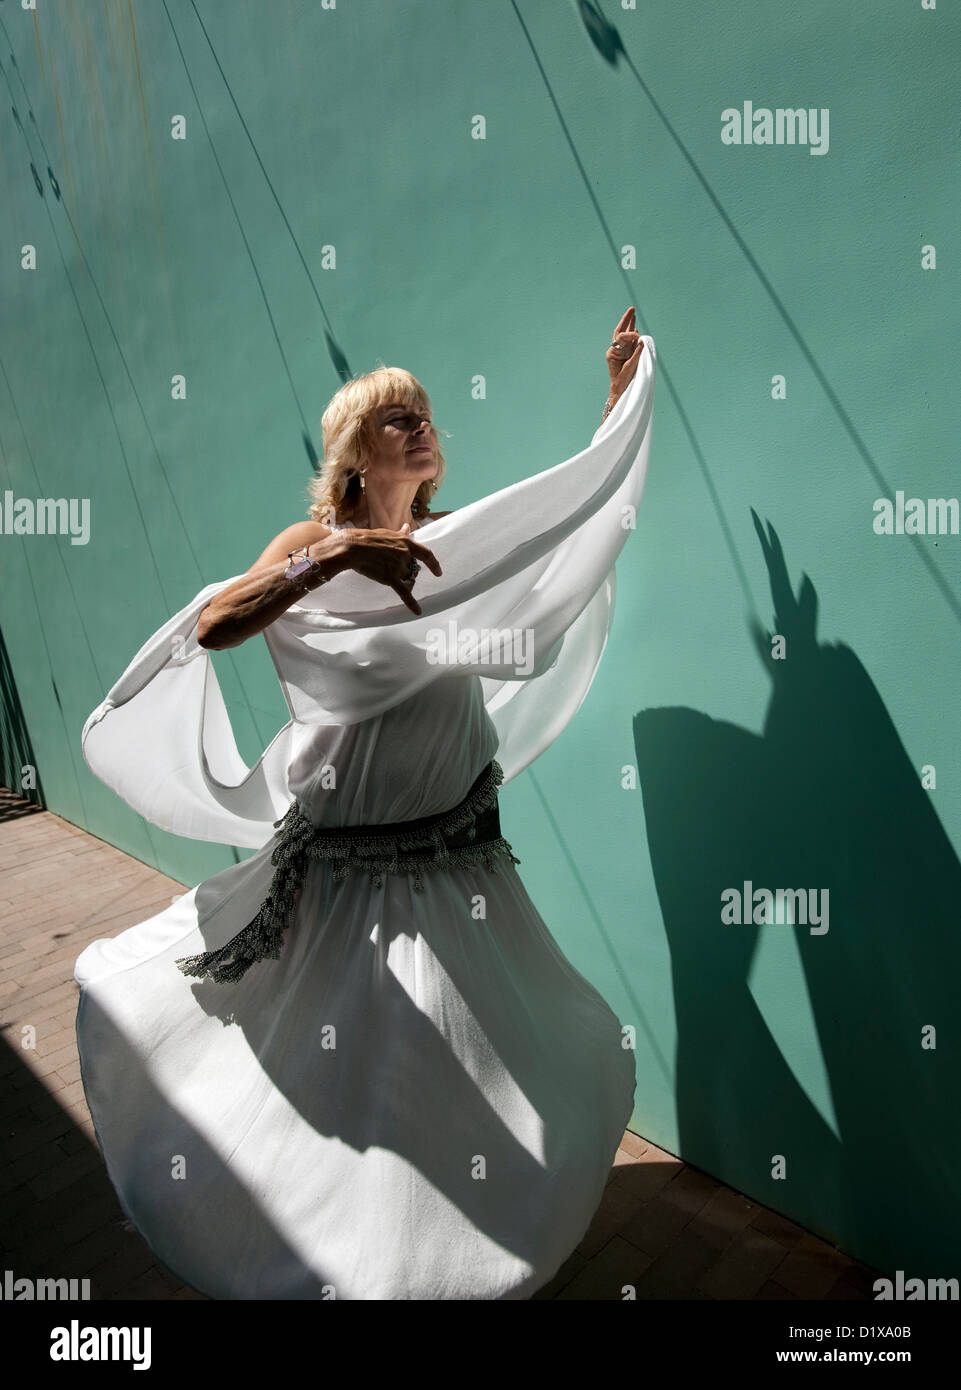 Woman in whitle dancing in the strong sun. Stock Photo